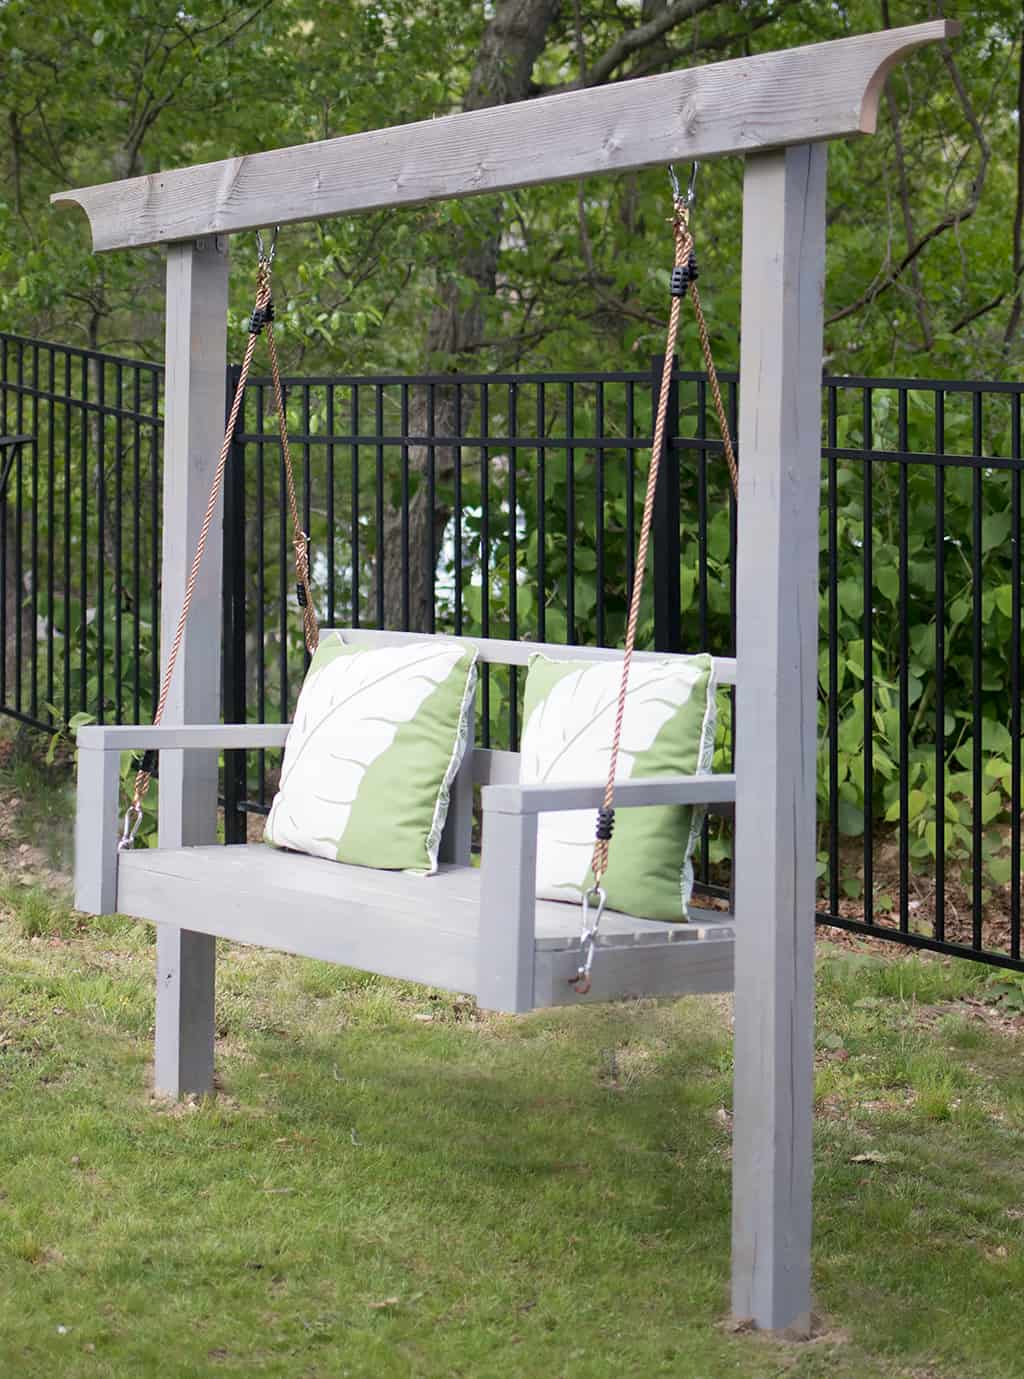 How to Build a Porch Swing Stand & How to Hang a Porch Swing